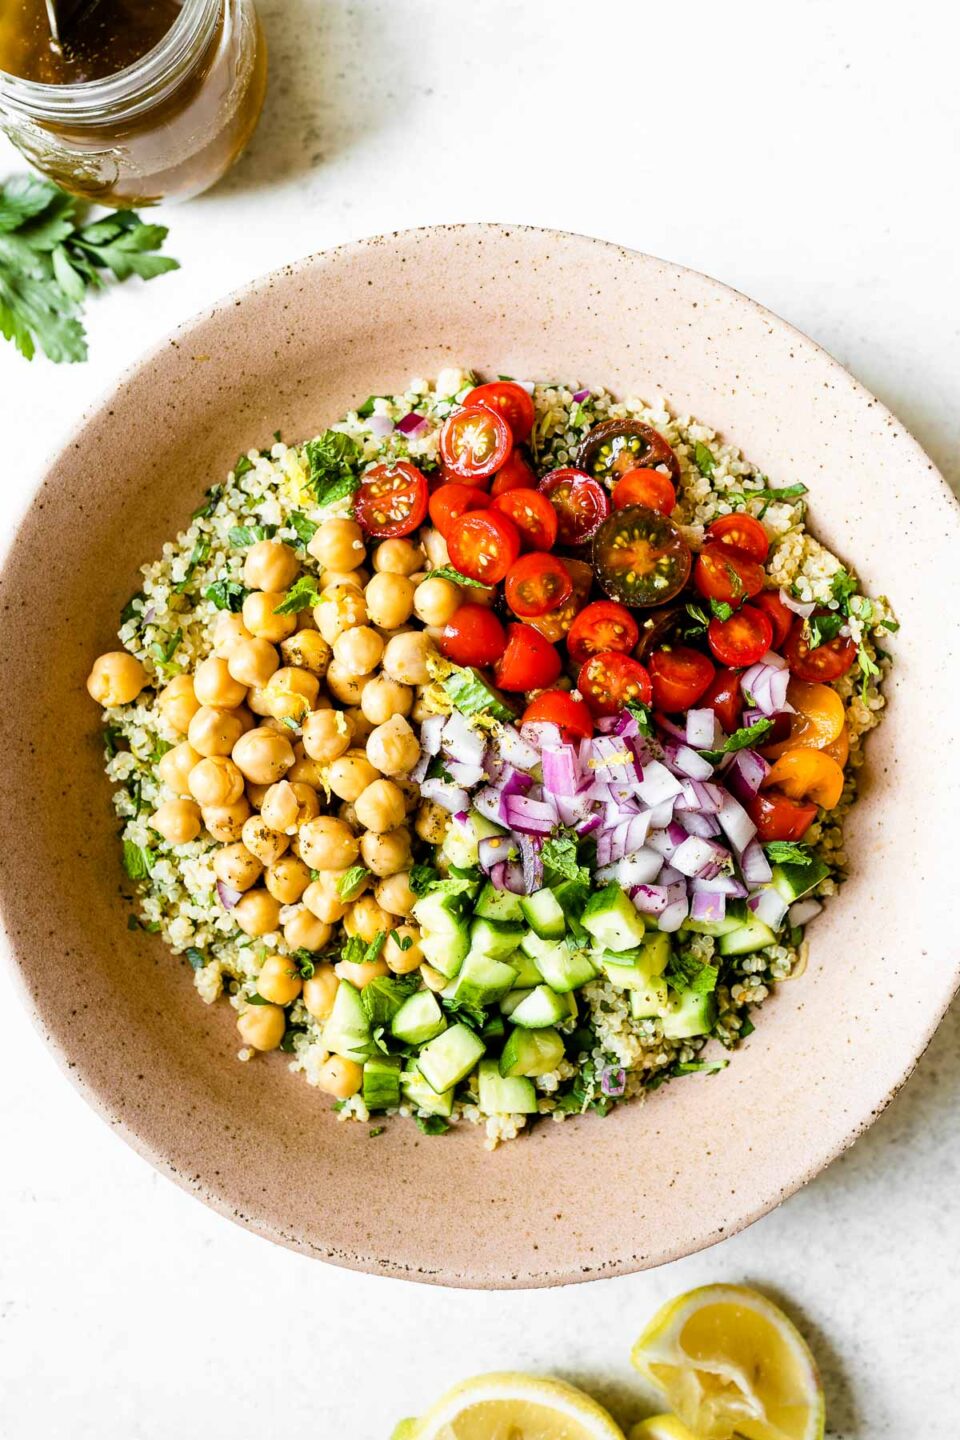 Falafel-ish quinoa salad ingredients layered in groups in a large pink serving dish - quinoa topped with chickpeas, cucumbers, diced red onion & tomatoes.